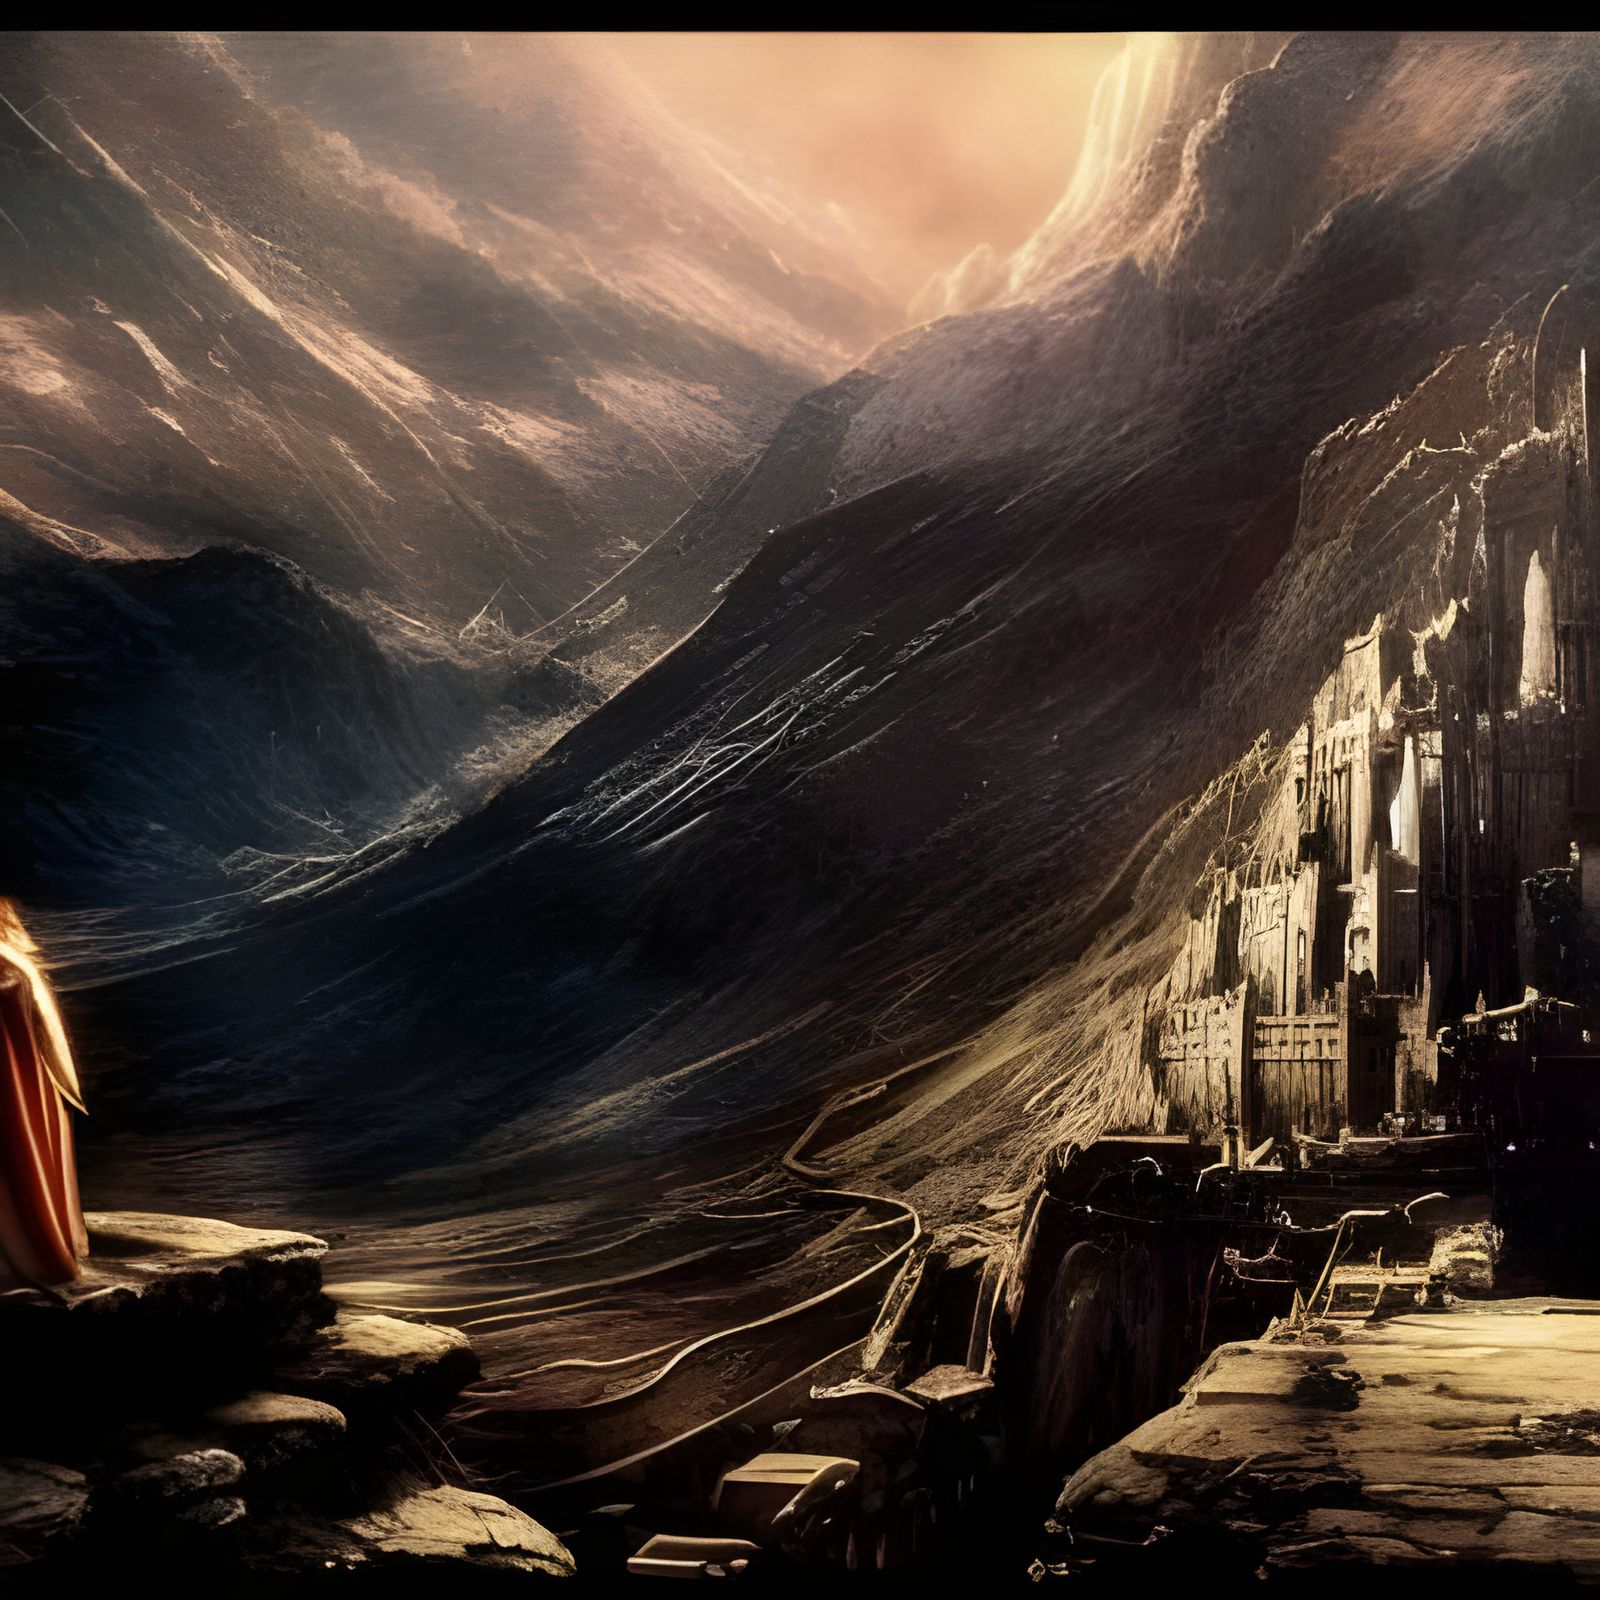 Portrait of Gondolin in Middle-Earth interpreted through an Alan Lee style.